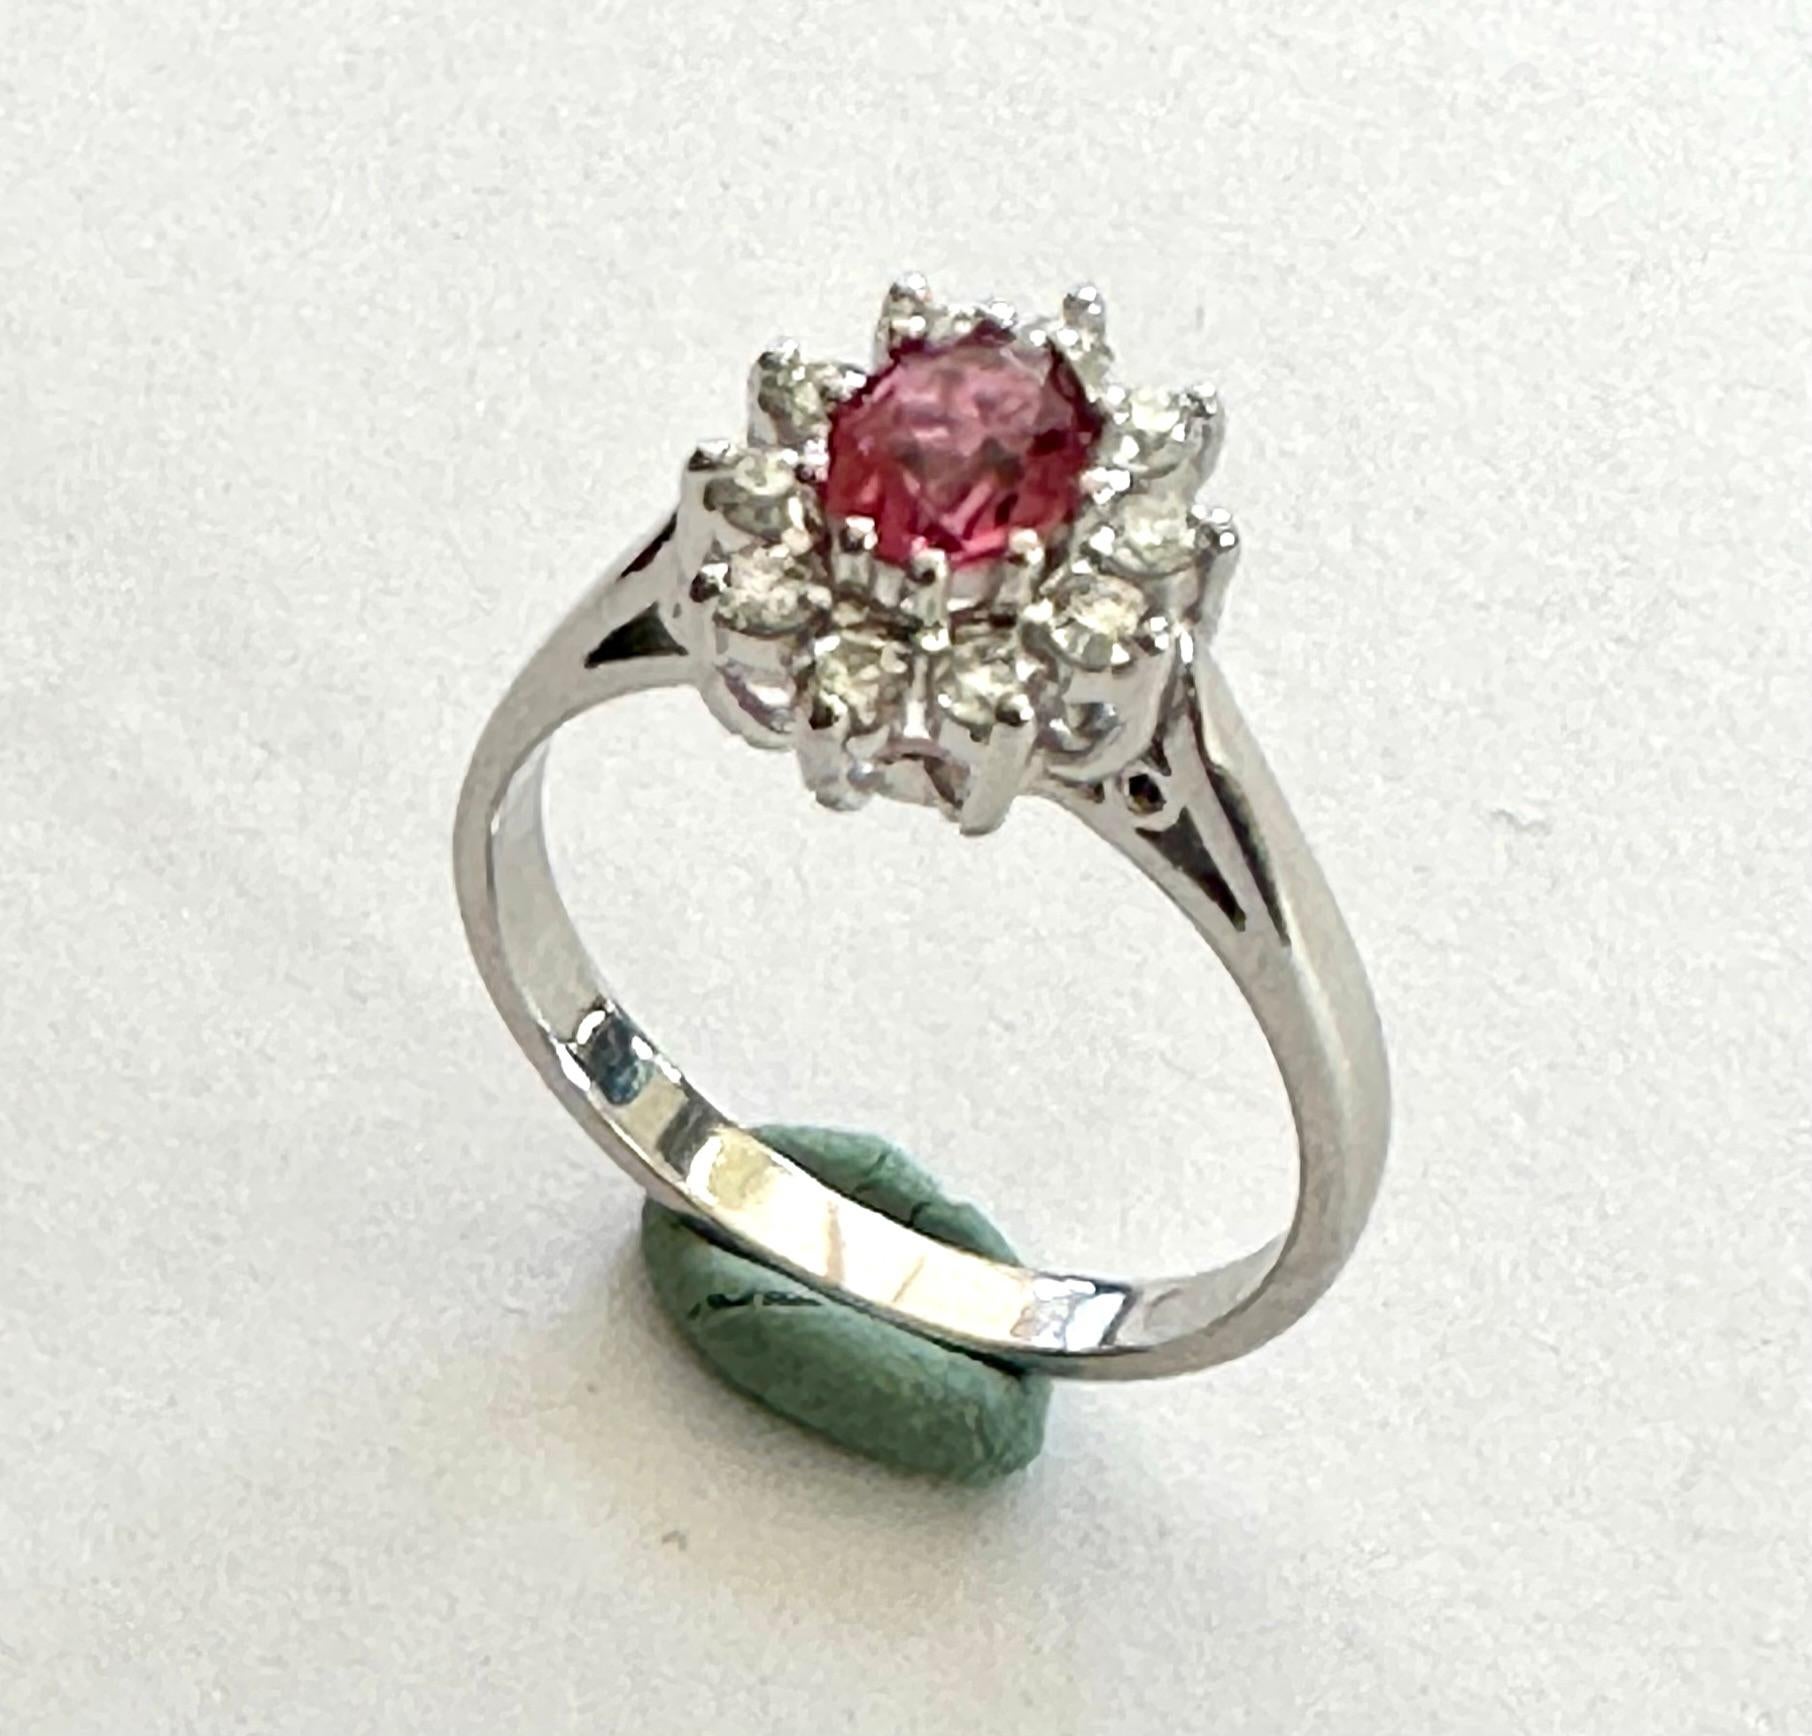 A 14K. white gold entourage ring
1 natural tourmaline (pink tourmaline) due to 0.50 ct, oval cut, color intense pink (nice quality)
10 brilliant cut diamonds of 0.03ct SI/G each
Ring in new condition.
Size: 17.25 (54) USA: 7- UK: N+
Weight: 4.03